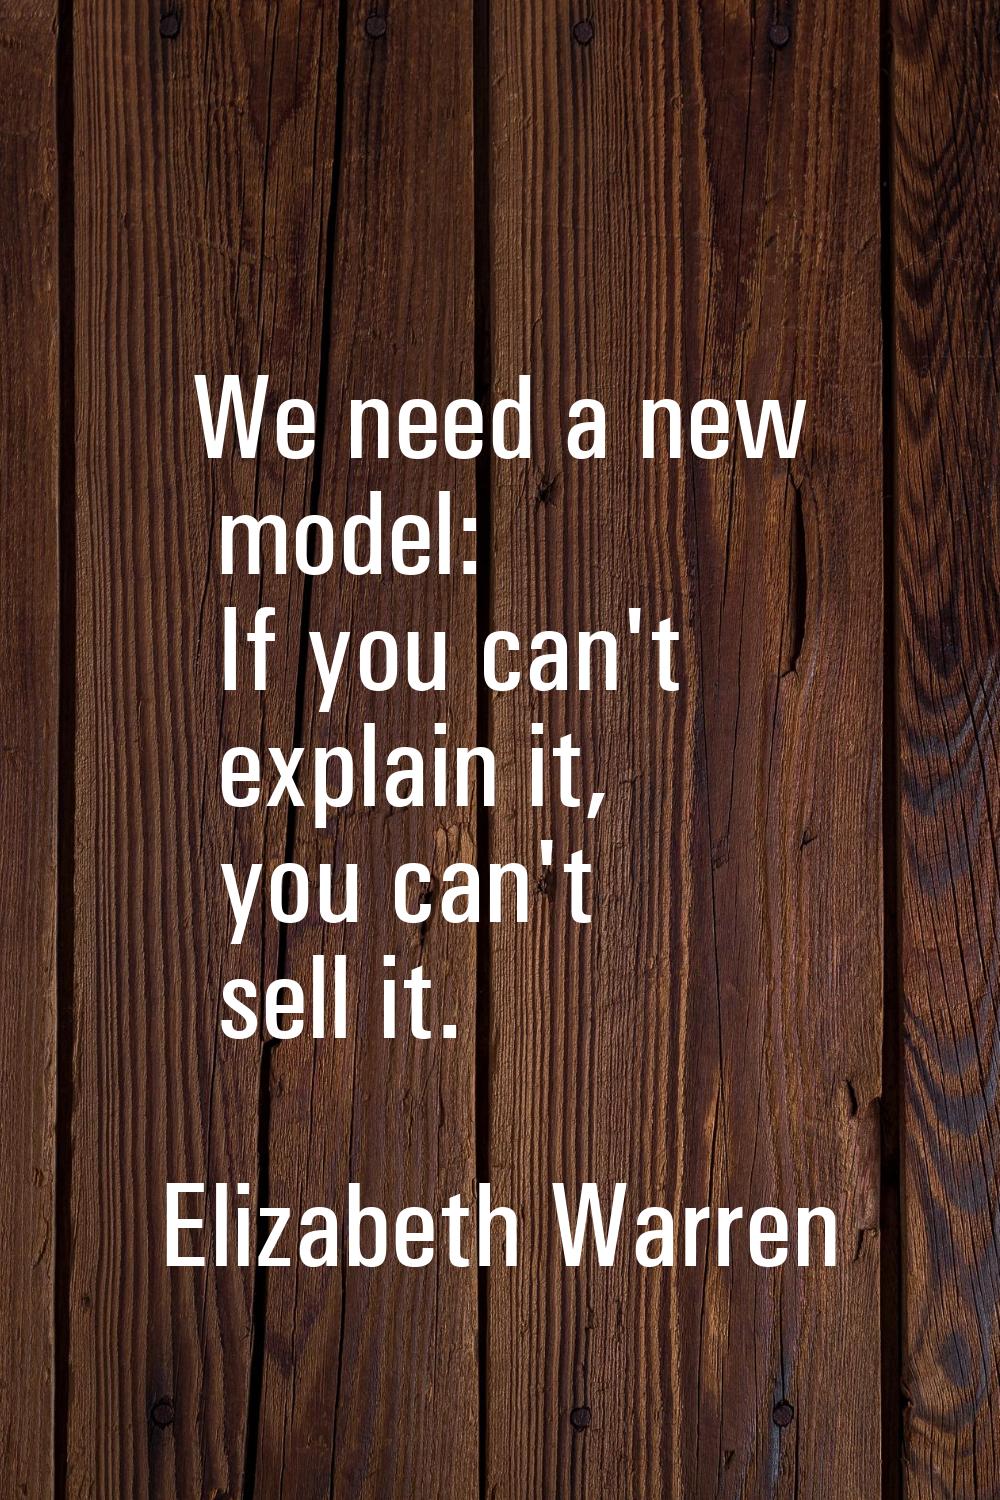 We need a new model: If you can't explain it, you can't sell it.